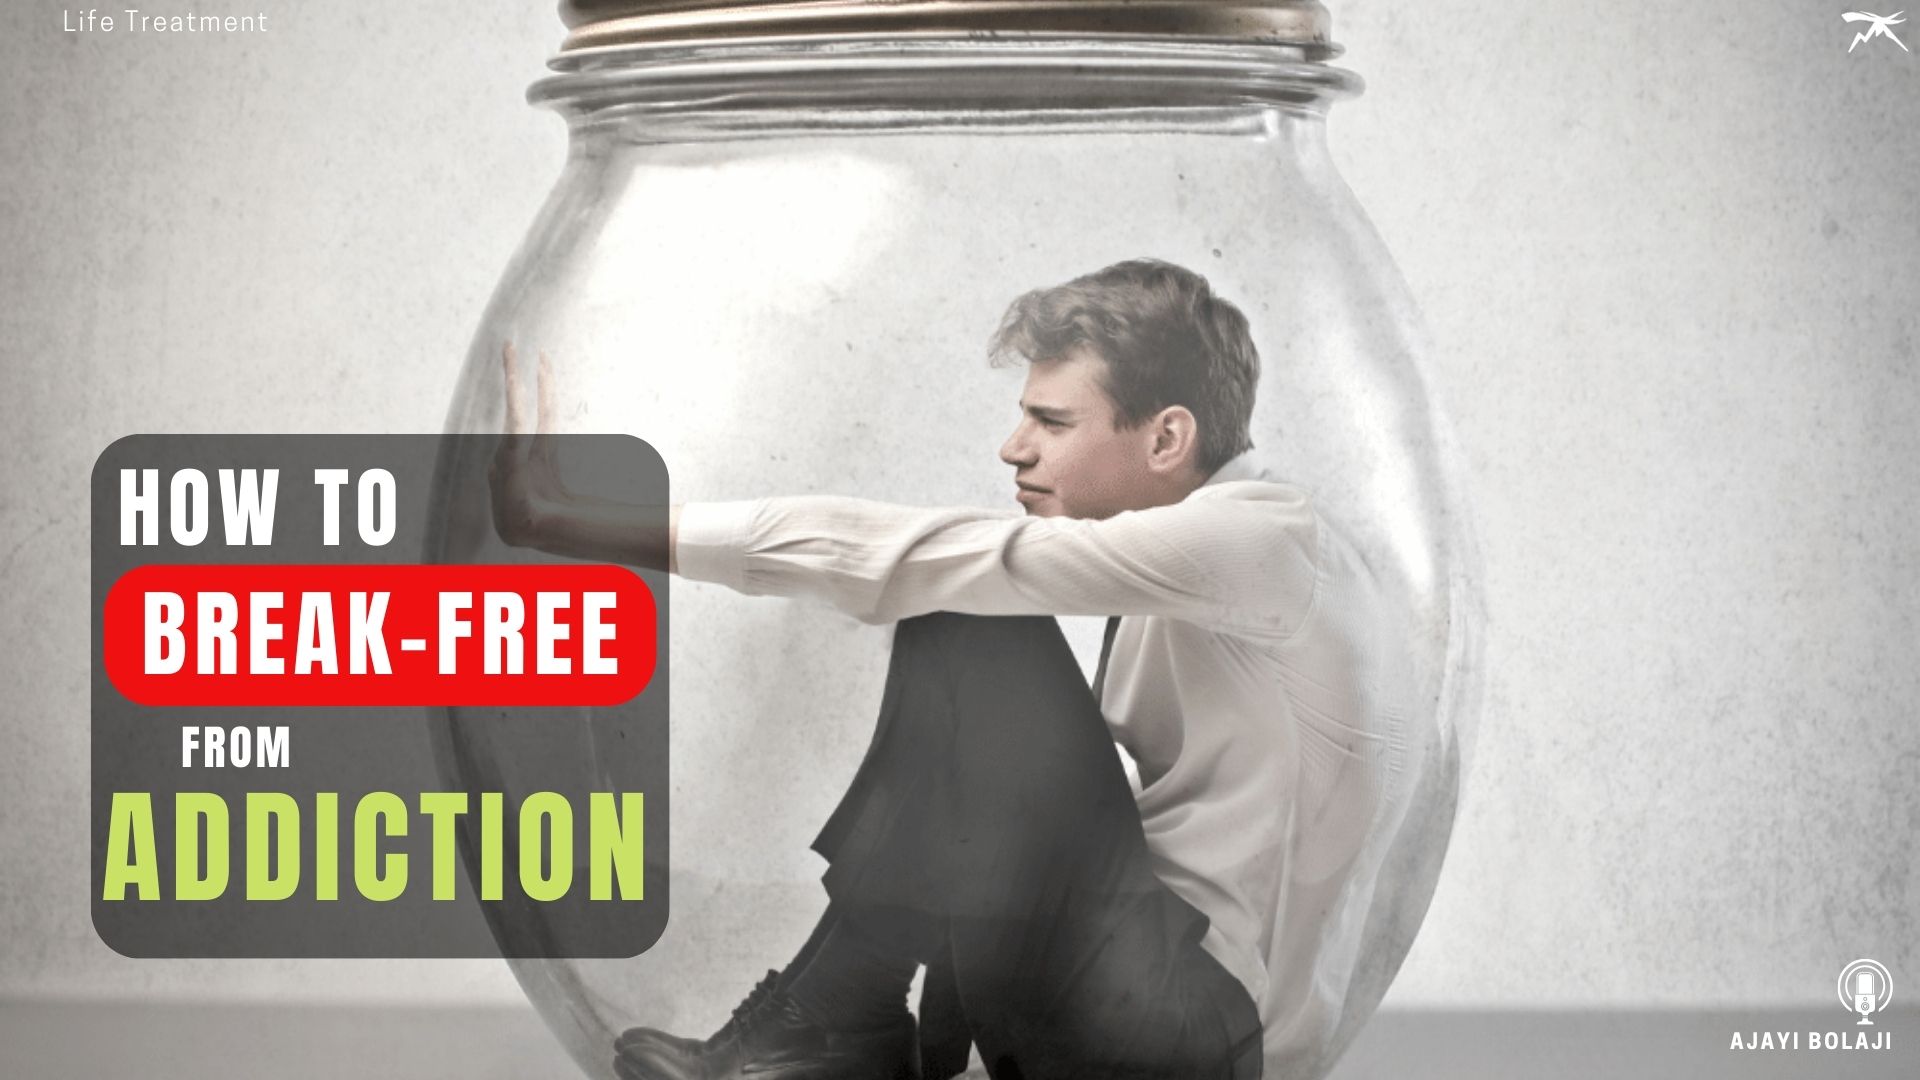 How To BREAK-FREE From ADDICTION: 7 Quick And Easy Steps